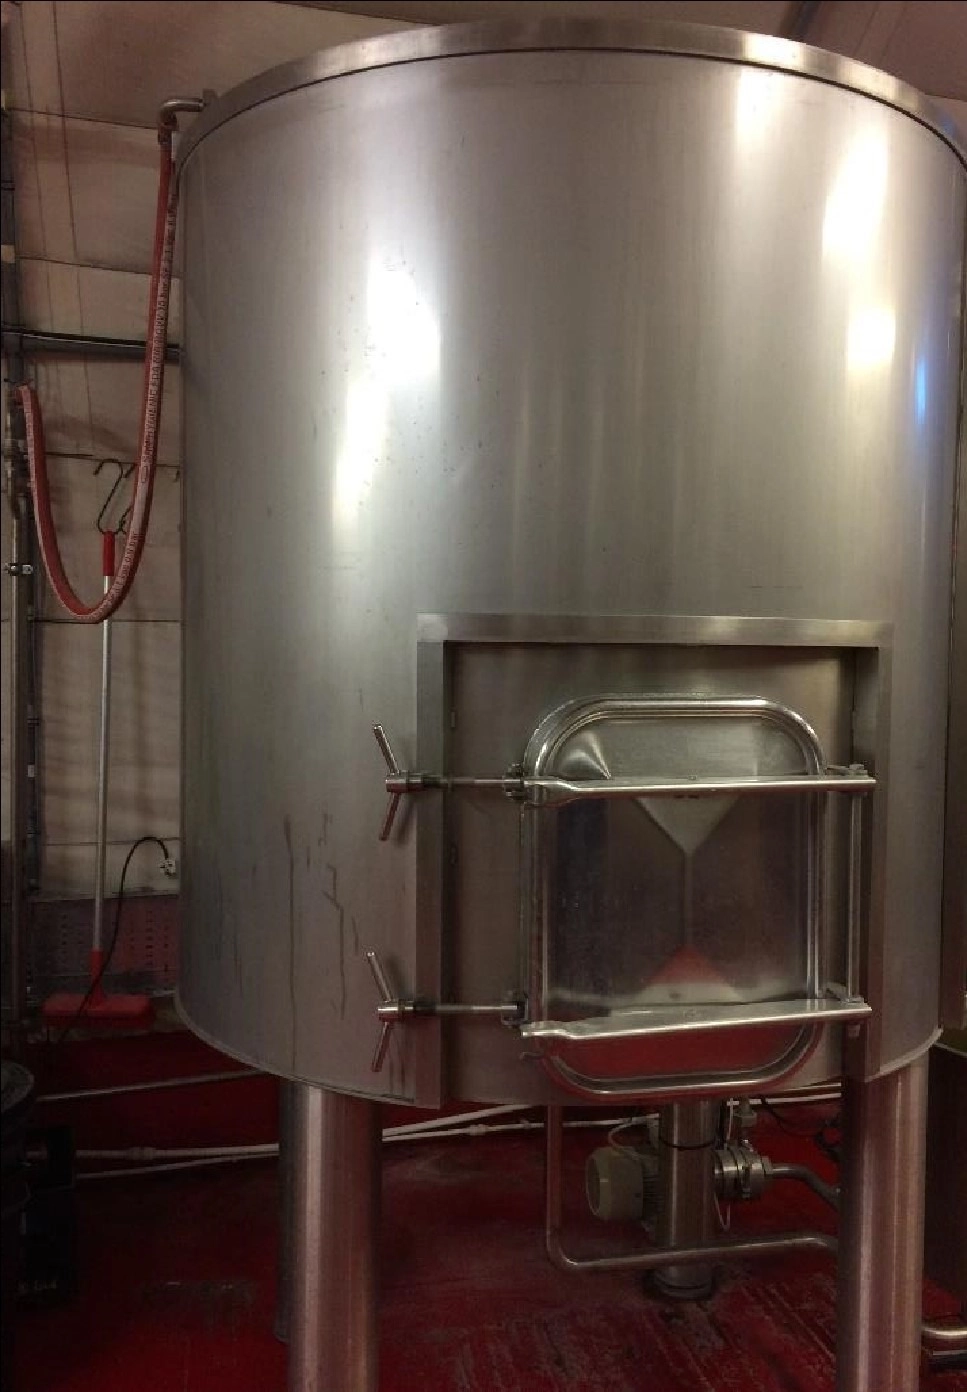 Microbrewery Equipment for Capacity 10 BBL / Brew